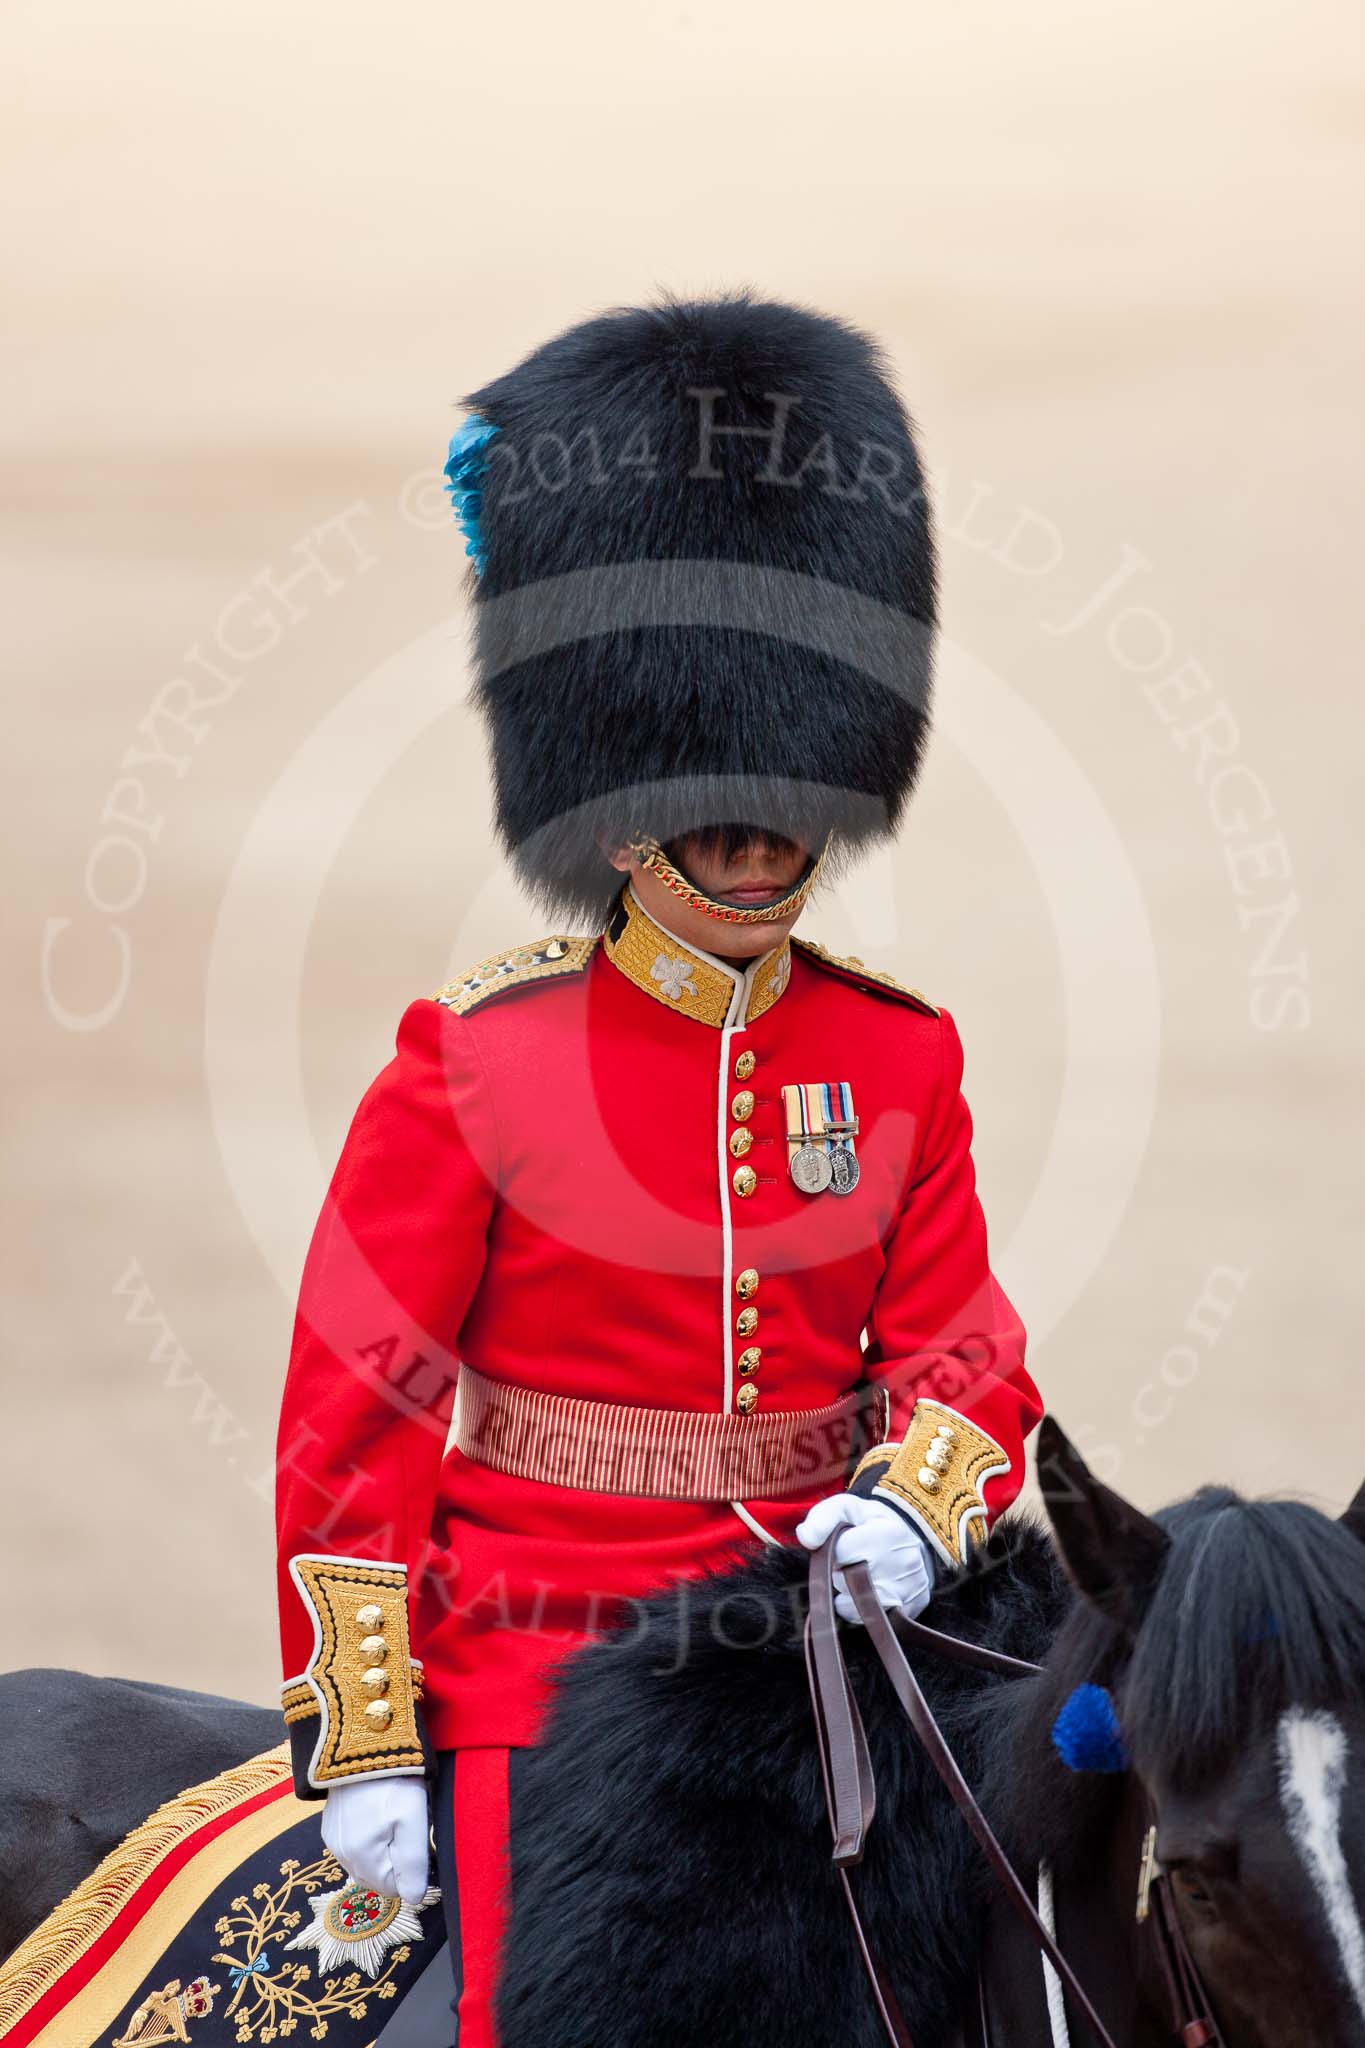 Trooping the Colour 2009: The Adjutant of the Parade, Captain J R H L Bullock-Webster, Irish Guards..
Horse Guards Parade, Westminster,
London SW1,

United Kingdom,
on 13 June 2009 at 10:39, image #73